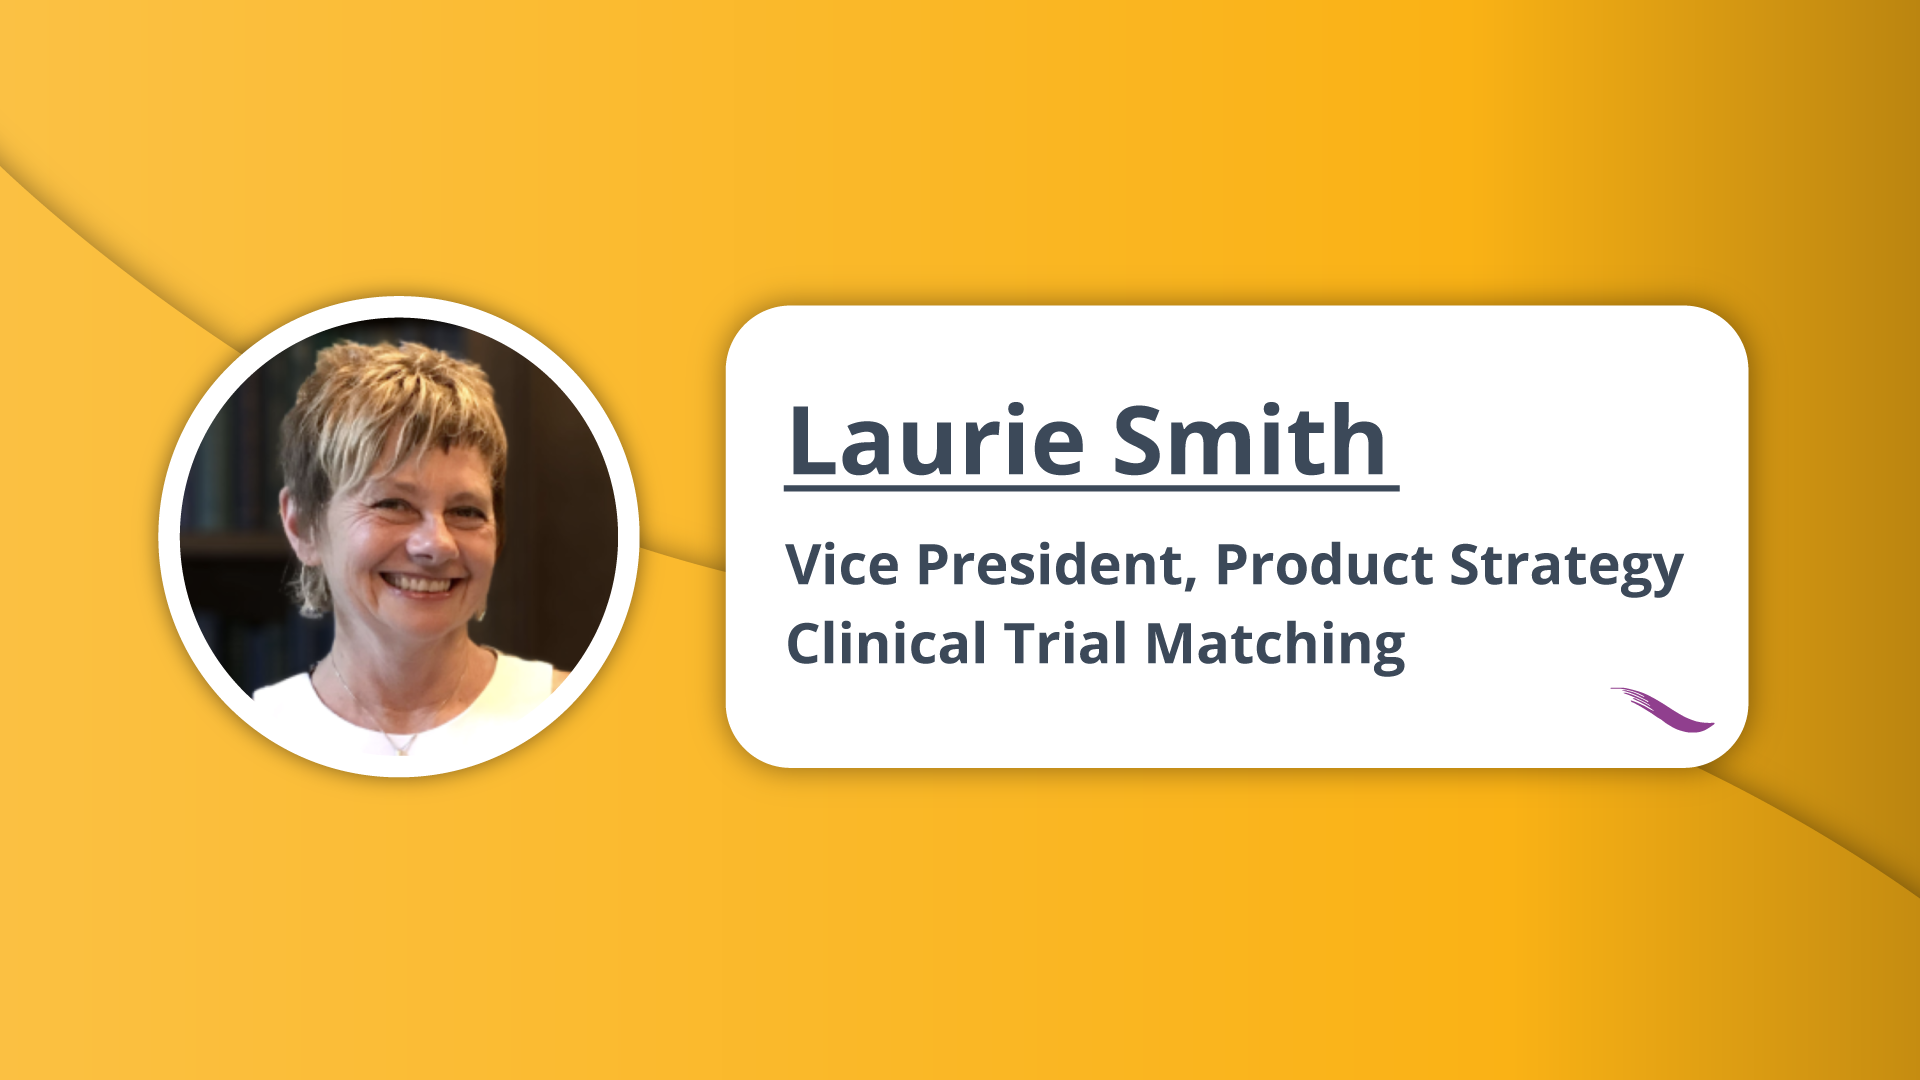 Experienced Healthcare Leader Laurie Smith Joins Inspirata as Vice President of Product Strategy for Clinical Trial Matching